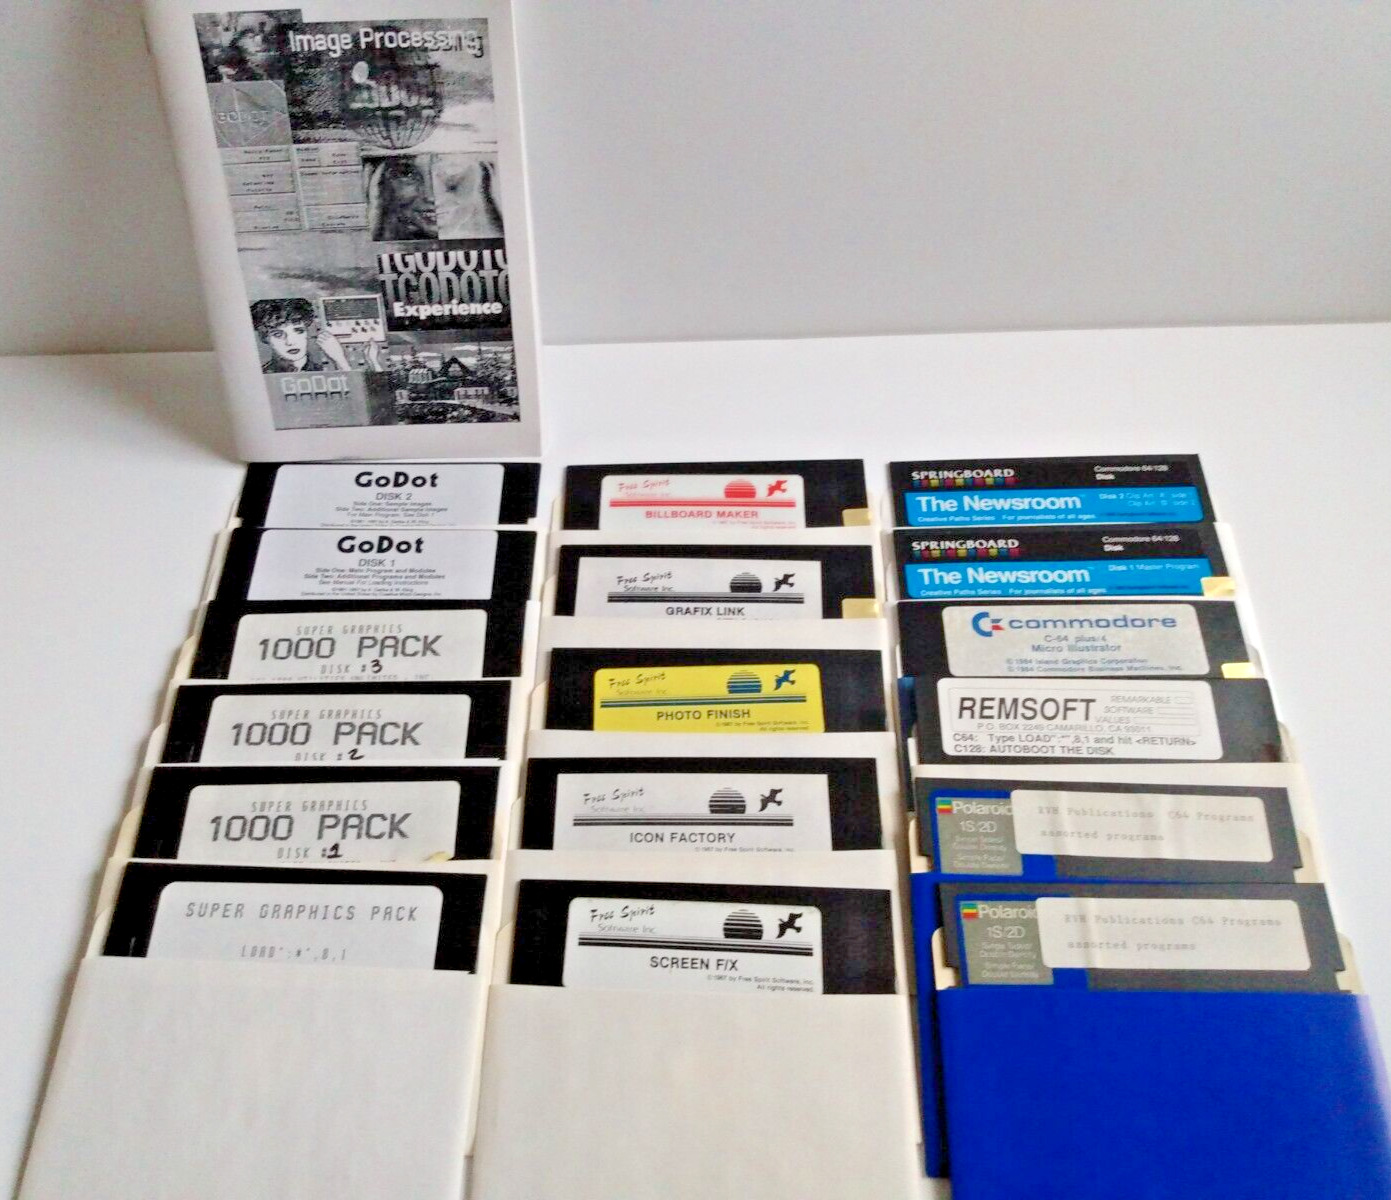 17 Disk Lot - GoDot Graphics Software, Super Graphics Pack & More for the C64